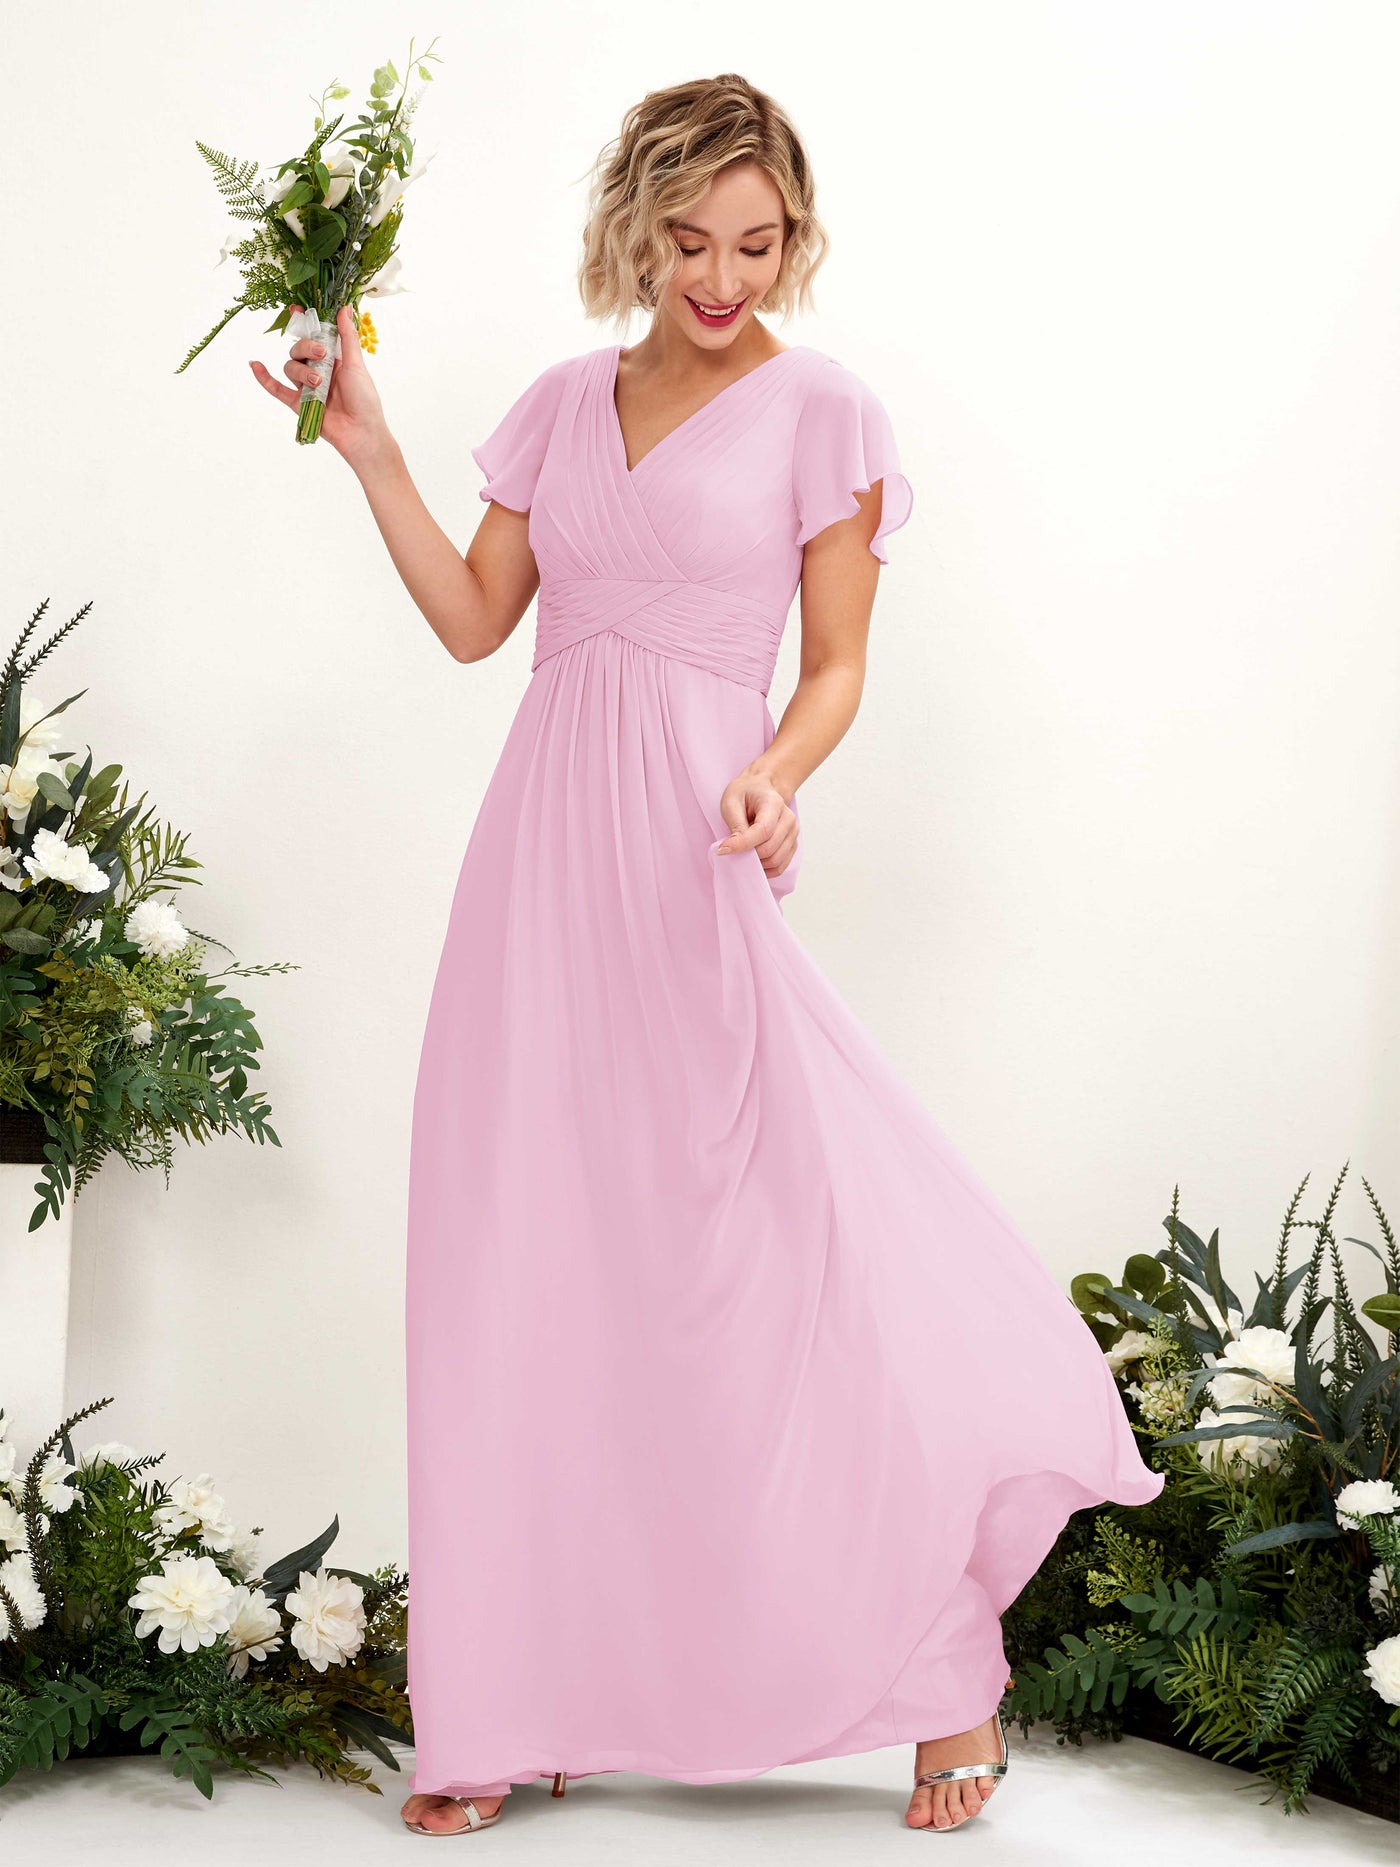 Candy Pink Bridesmaid Dresses Bridesmaid Dress A-line Chiffon V-neck Full Length Short Sleeves Wedding Party Dress (81224339)#color_candy-pink